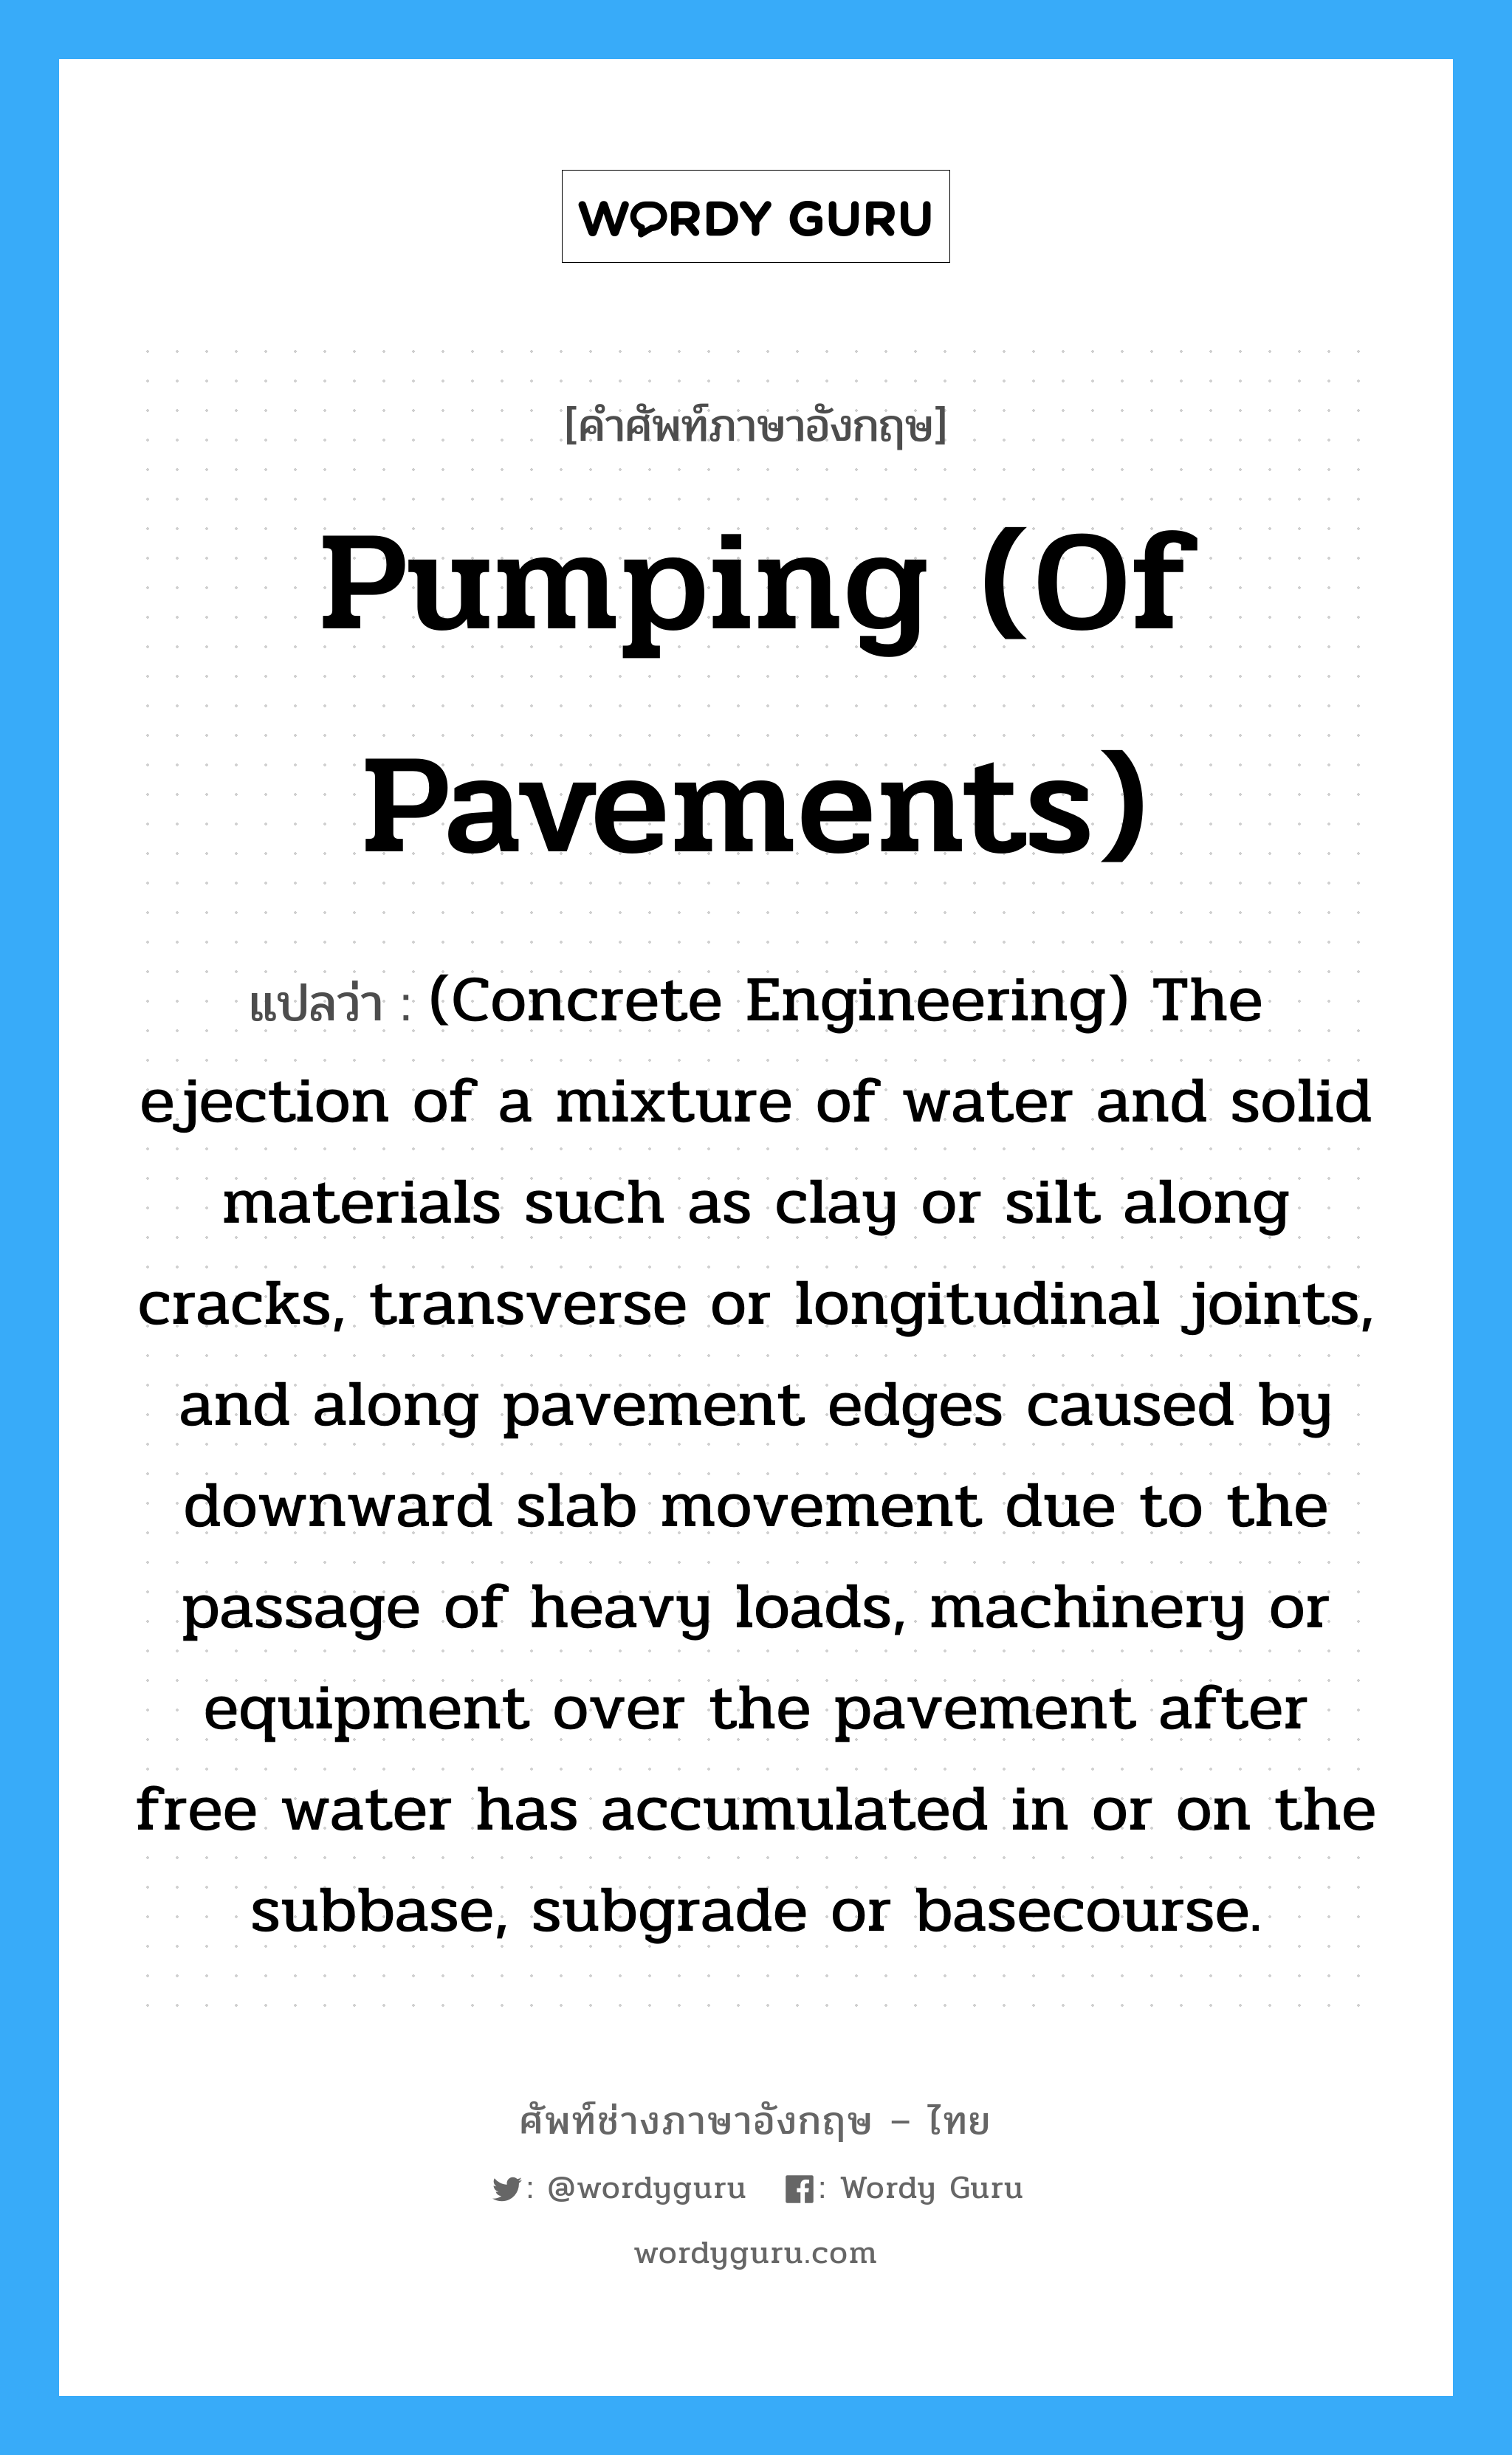 Pumping (of Pavements) แปลว่า?, คำศัพท์ช่างภาษาอังกฤษ - ไทย Pumping (of Pavements) คำศัพท์ภาษาอังกฤษ Pumping (of Pavements) แปลว่า (Concrete Engineering) The ejection of a mixture of water and solid materials such as clay or silt along cracks, transverse or longitudinal joints, and along pavement edges caused by downward slab movement due to the passage of heavy loads, machinery or equipment over the pavement after free water has accumulated in or on the subbase, subgrade or basecourse.